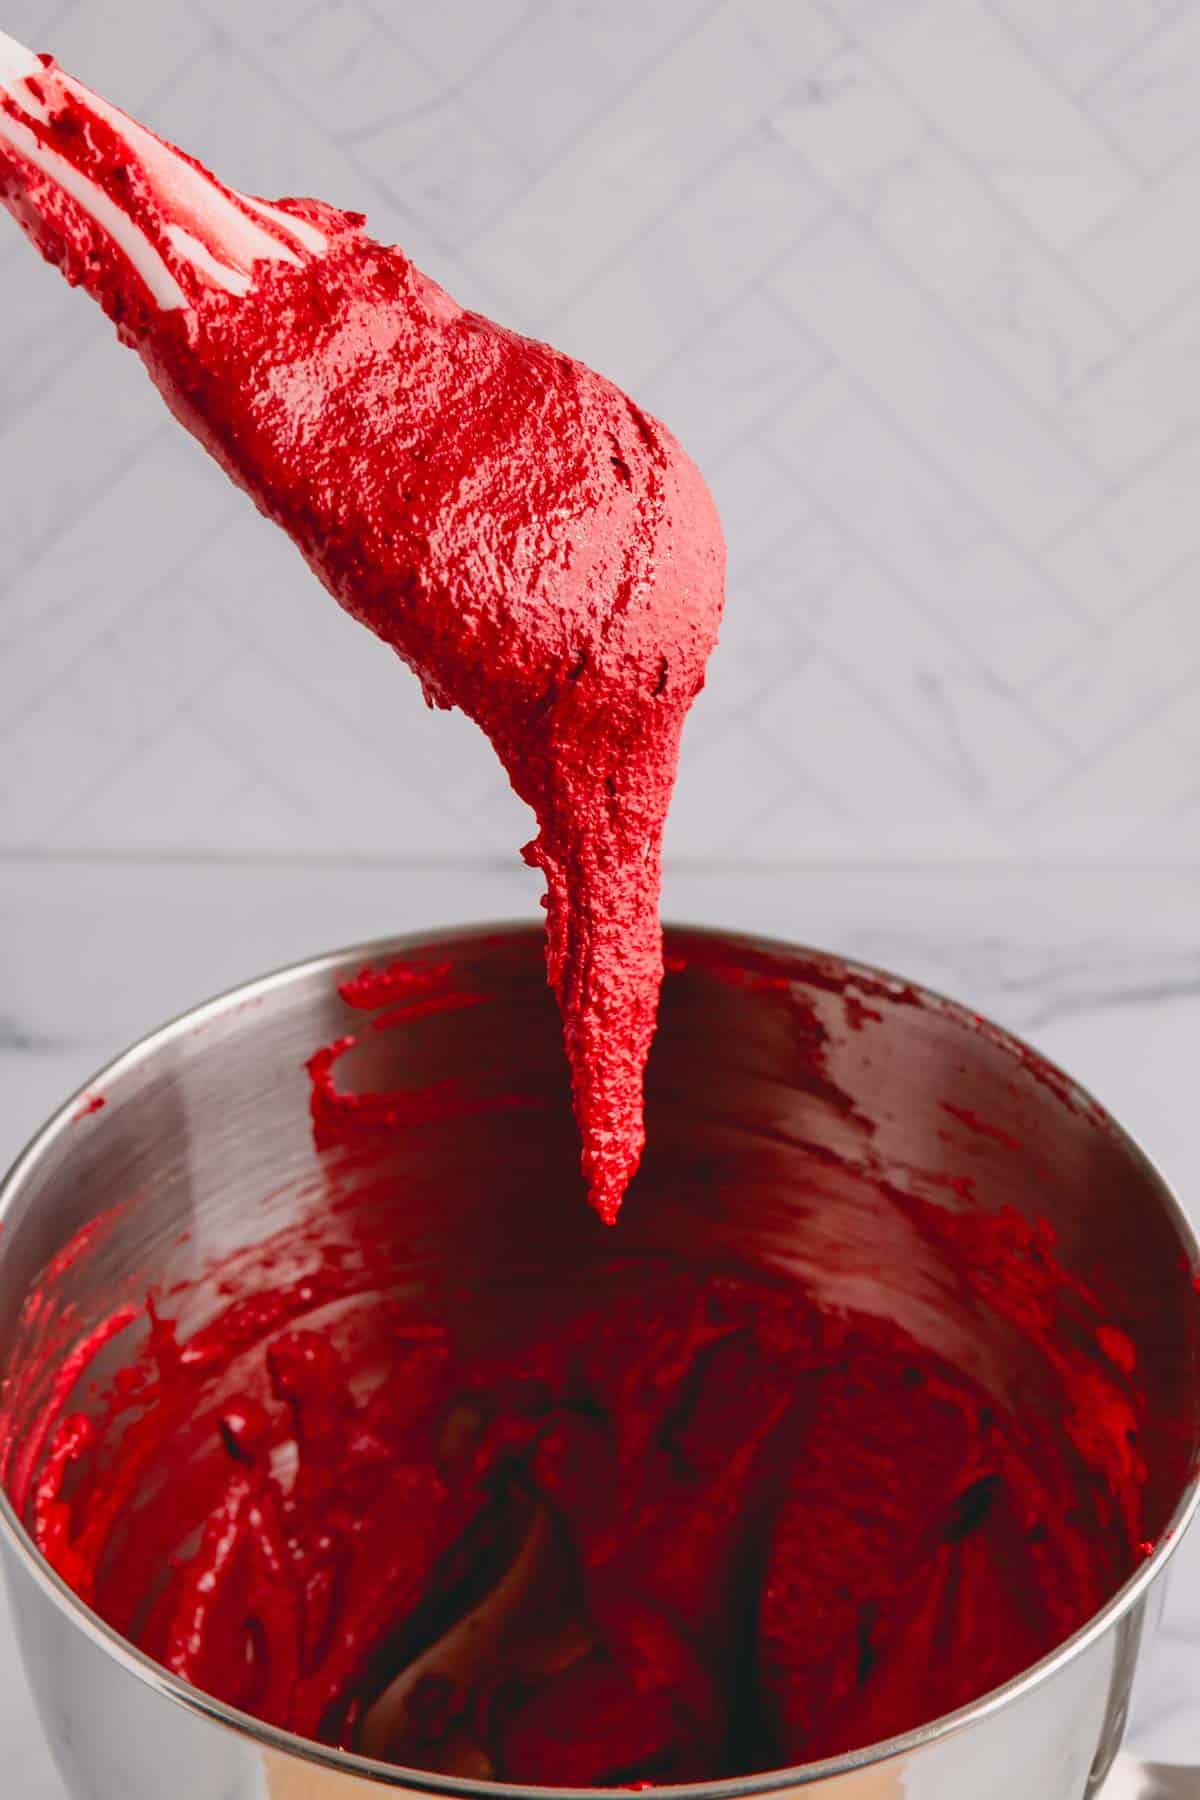 A spoonful of red macaron batter falling off the spatula into the mixing bowl.